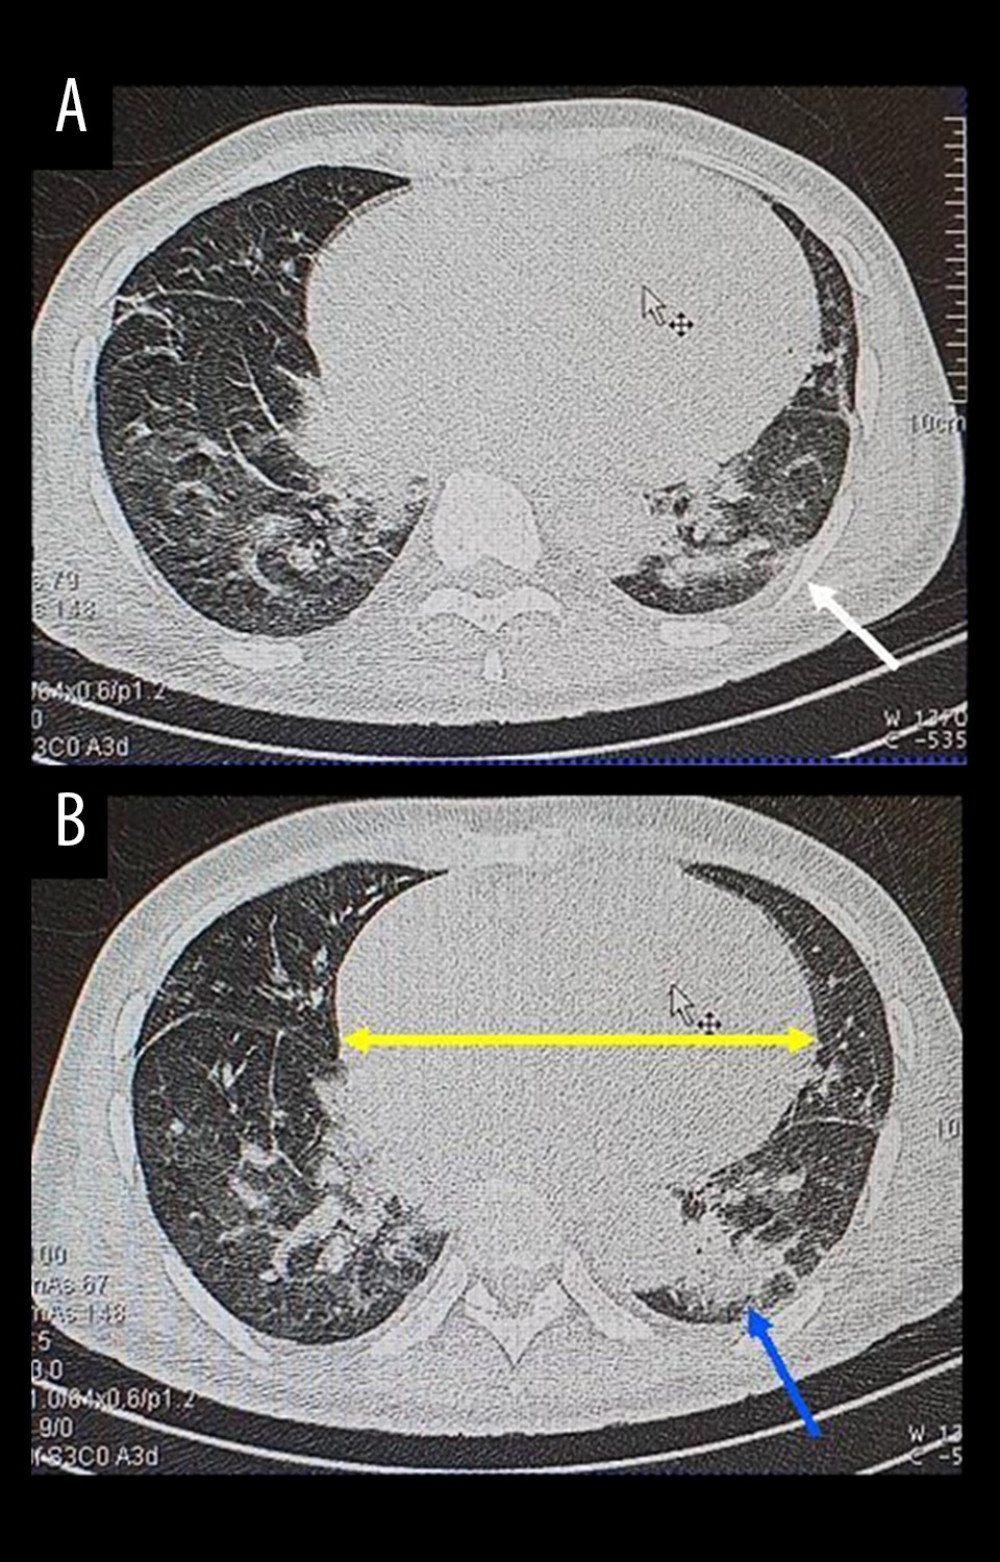 Chest CT scan with extensive lung lesions of 50% to 55%. (A) Axial view in parenchymal window showing left basal subpleural consolidation (white arrow). (B) Axial slice showing nodular ground-glass opacities of the culmen with ventilatory disorders (blue arrow) and cardiomegaly (yellow arrow).